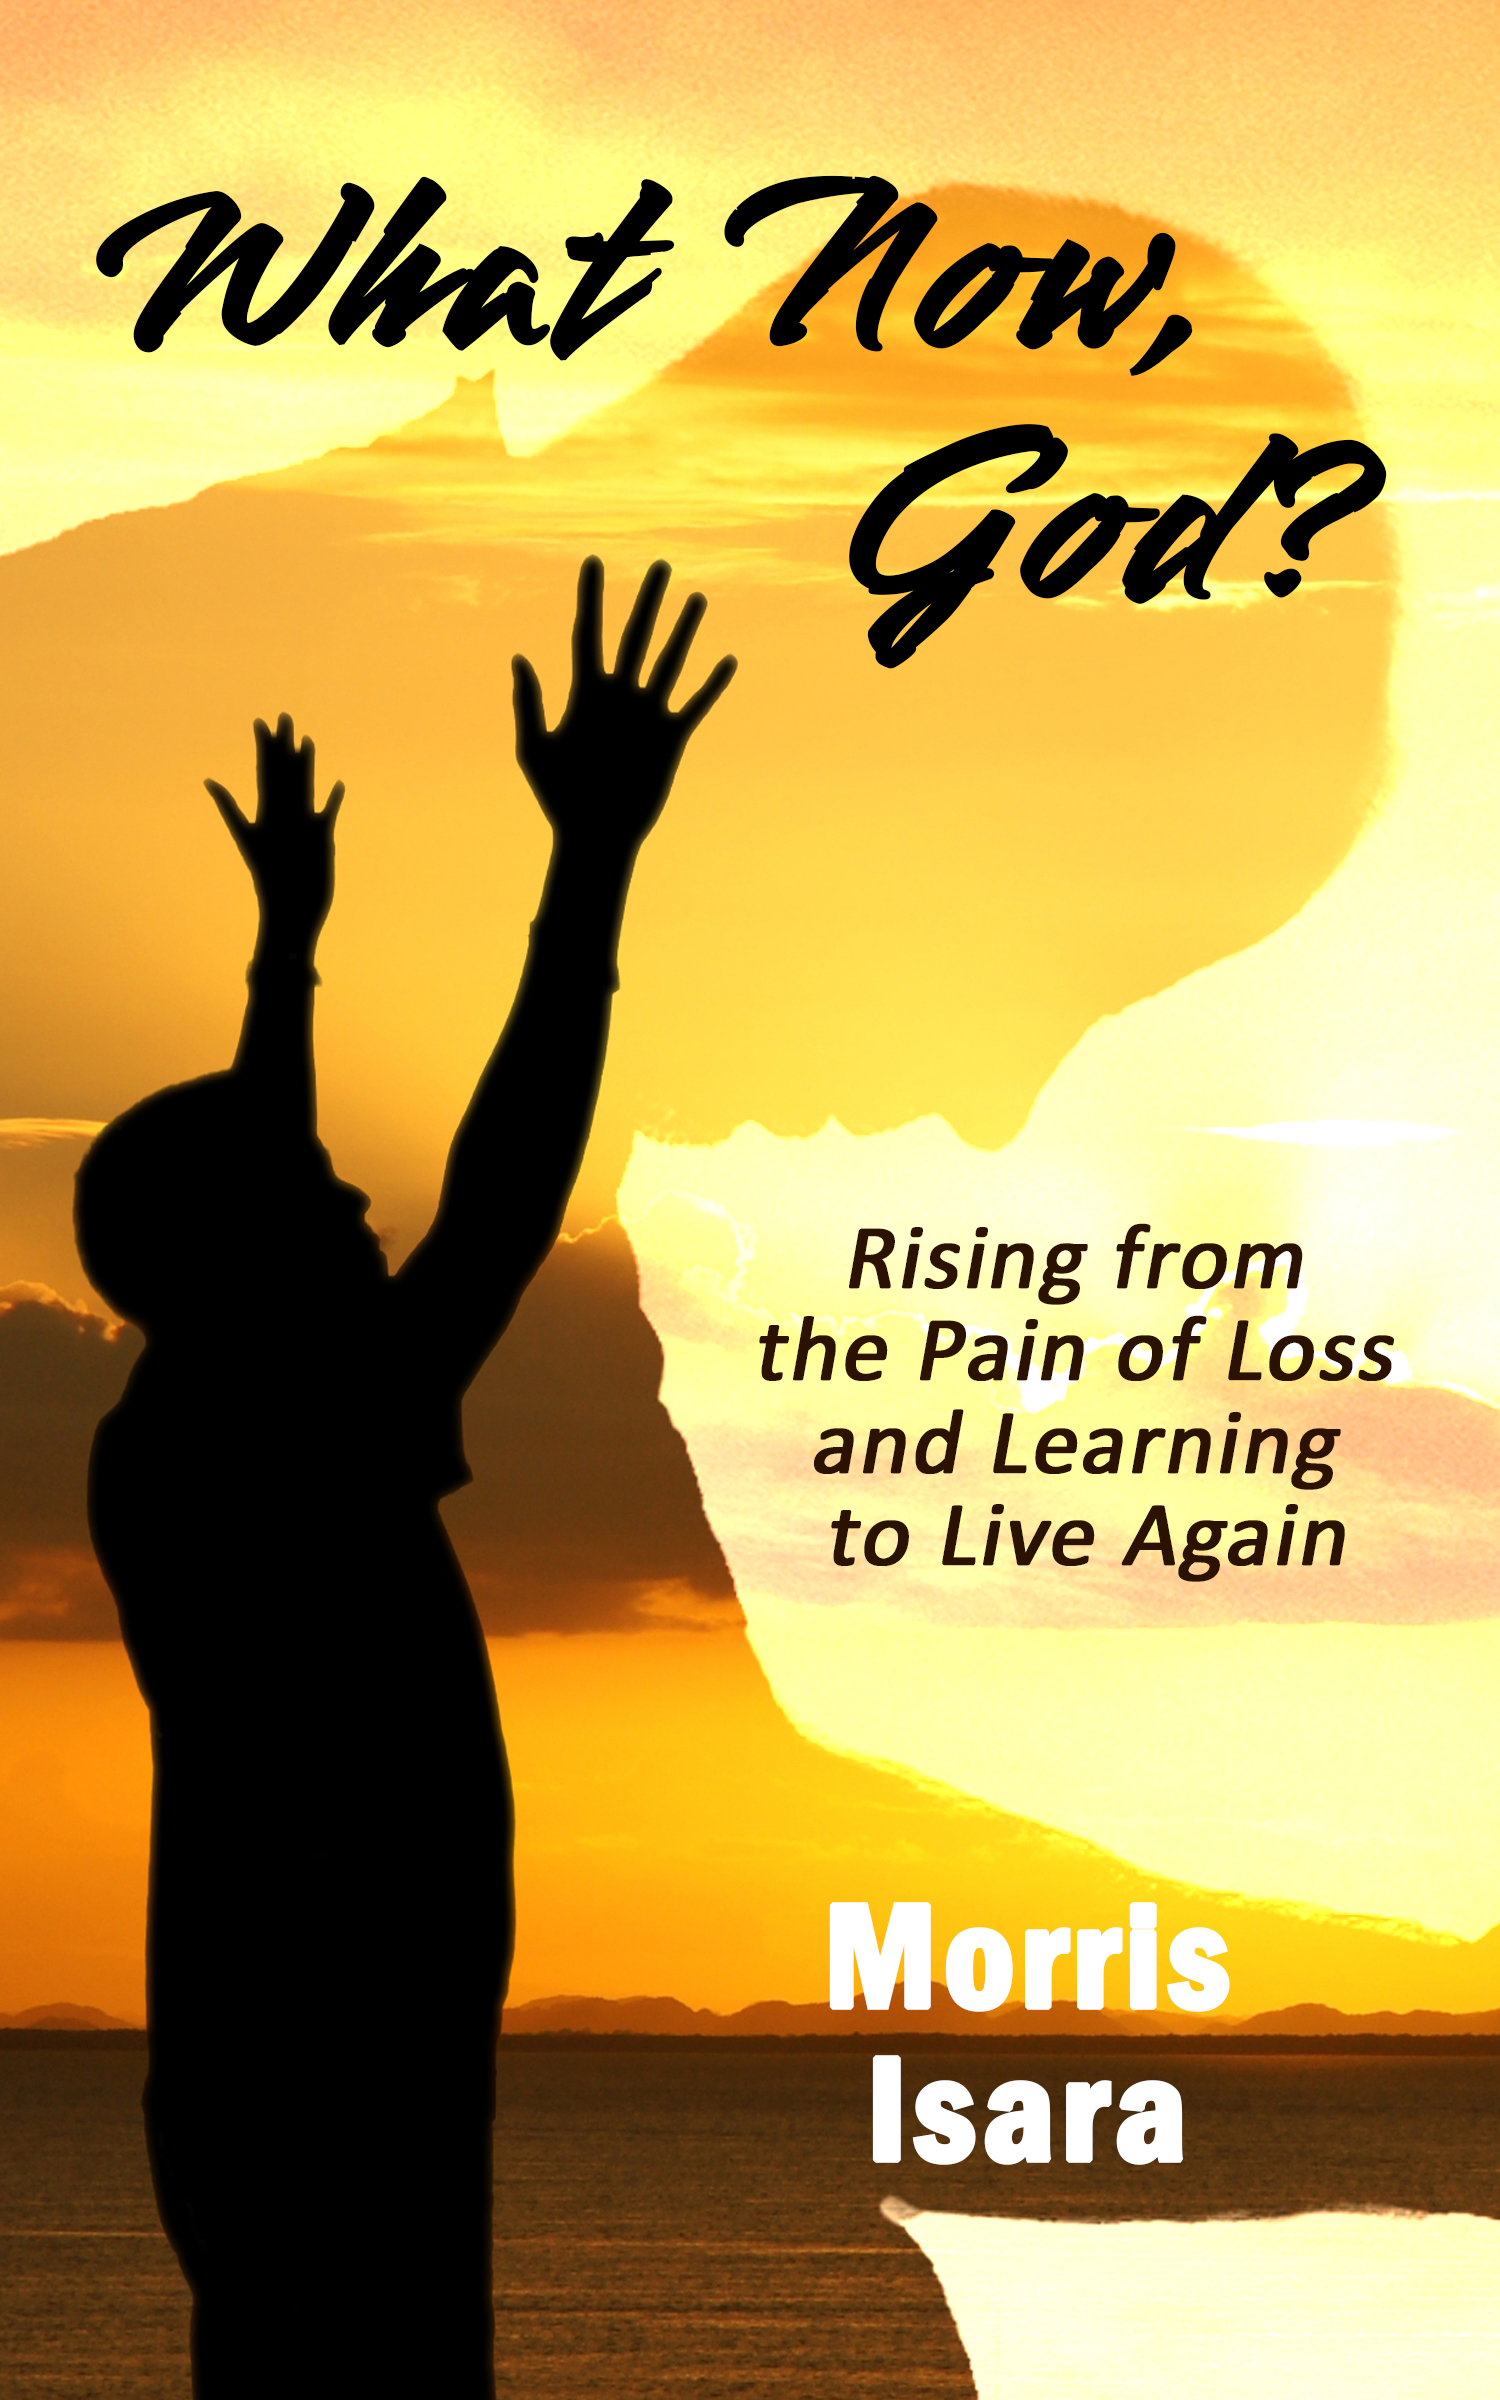 What Now, God? by Morris Isara